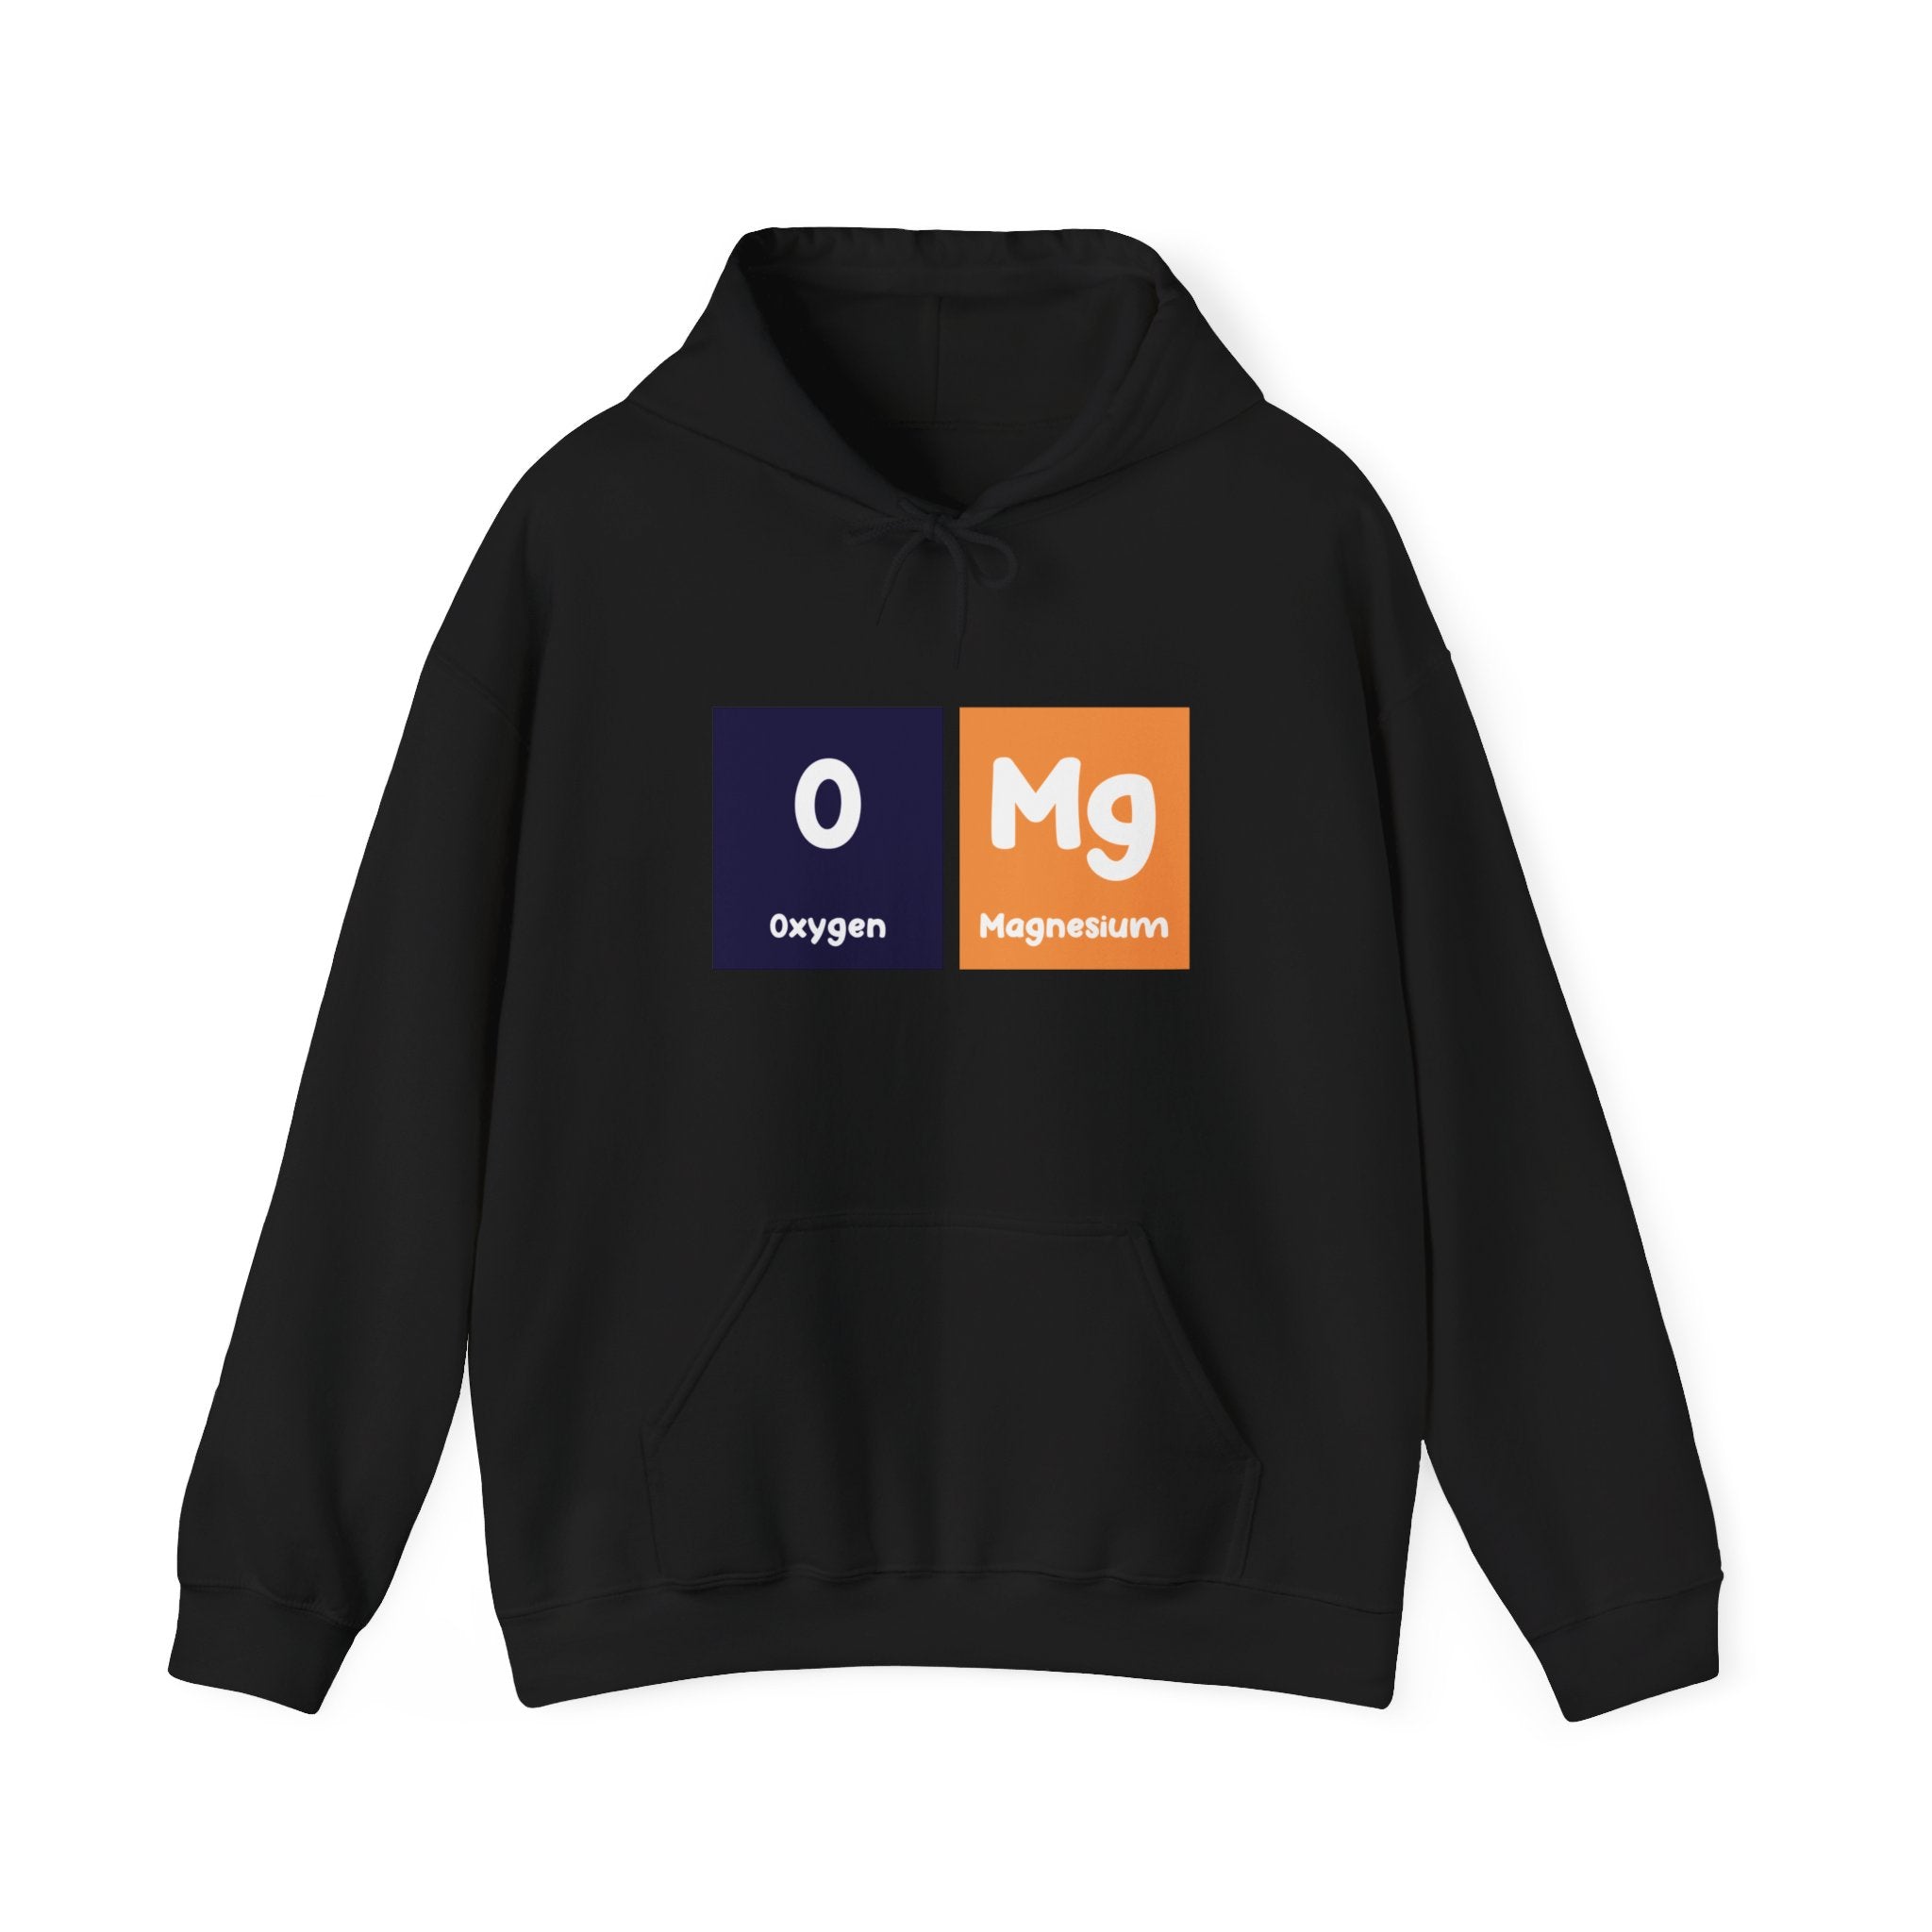 Experience ultimate comfort with our O-Mg - Hooded Sweatshirt, featuring a fashionable design that showcases the chemical symbols for Oxygen (O) and Magnesium (Mg) on the front.